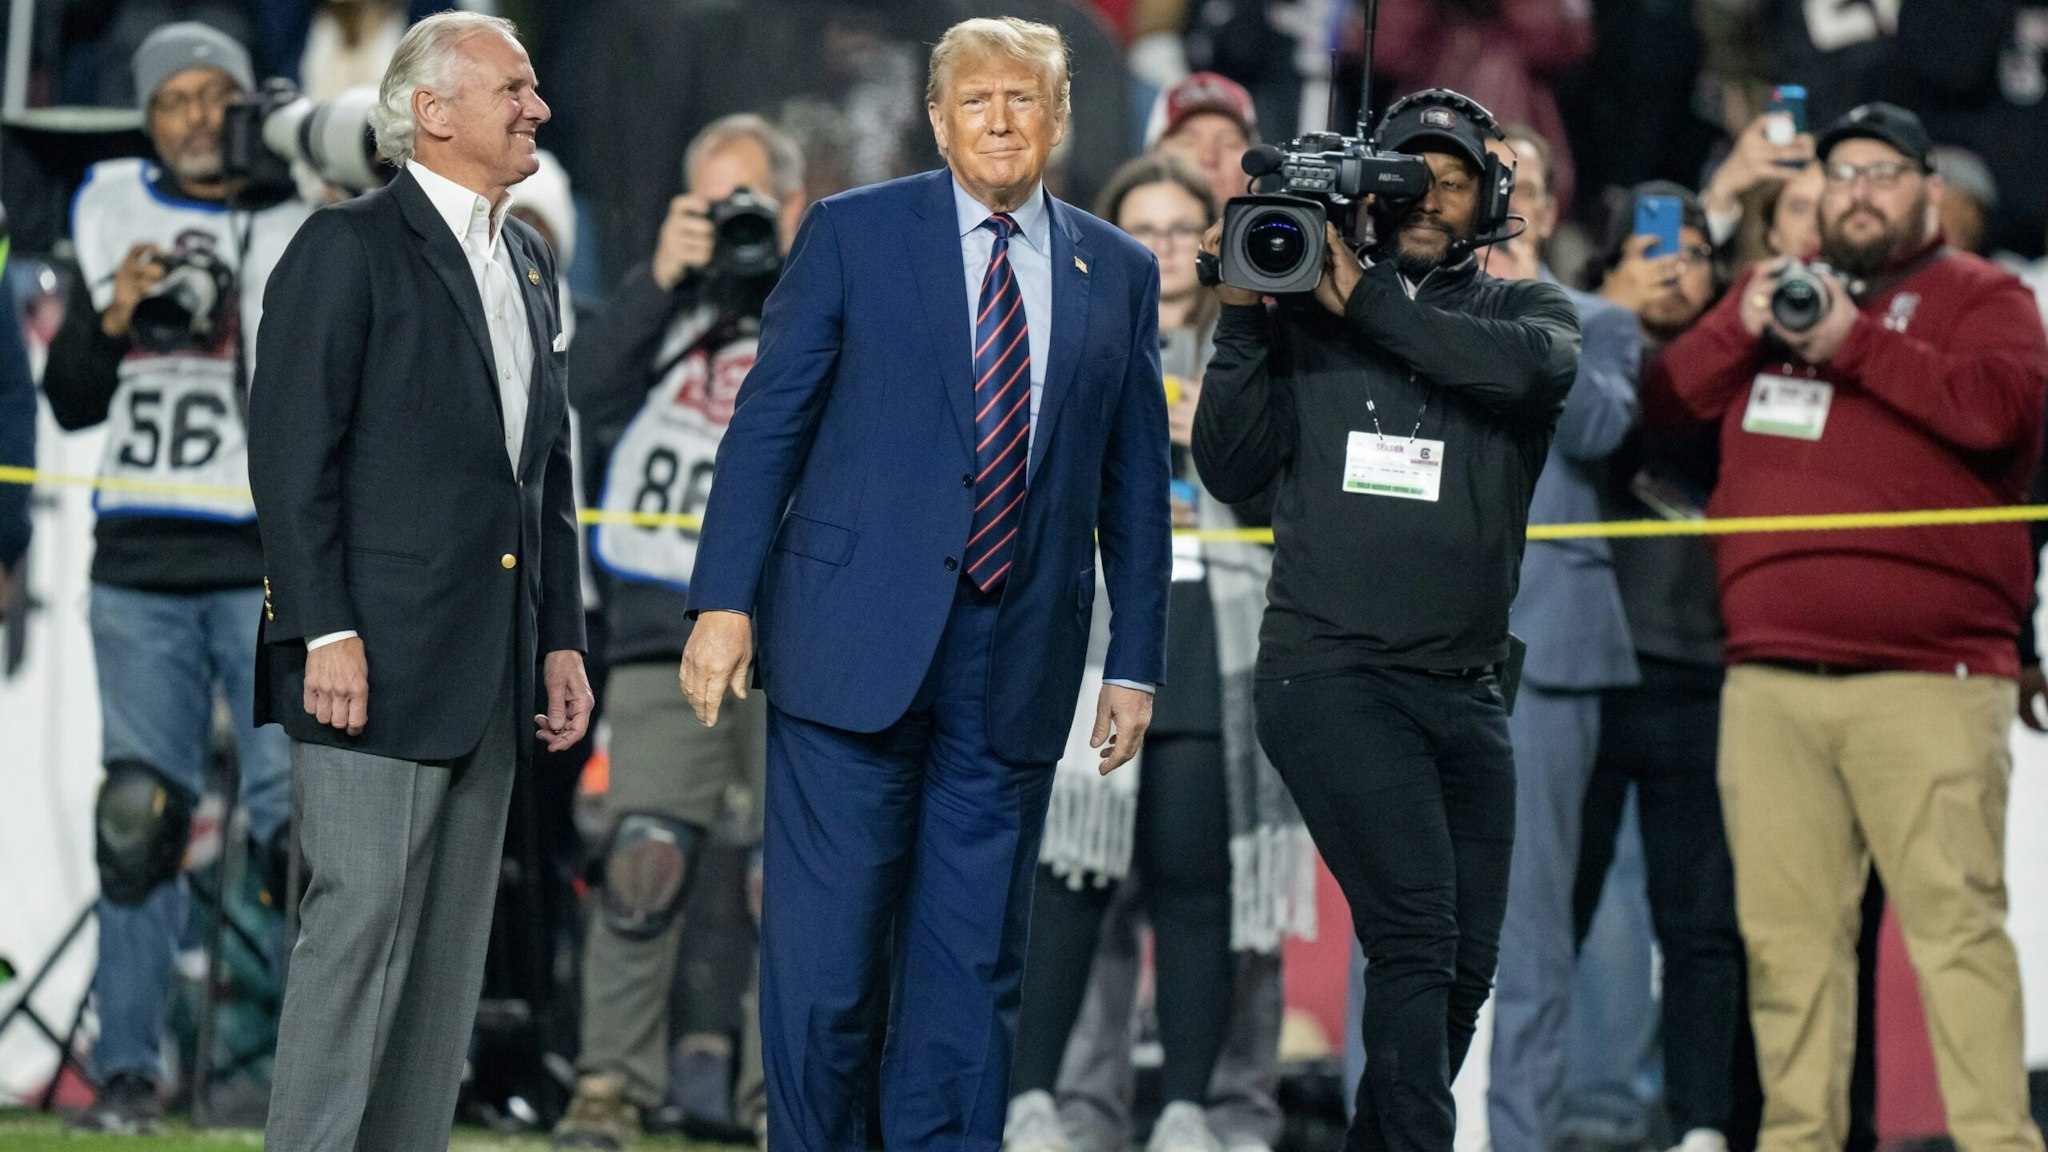 COLUMBIA, SOUTH CAROLINA - NOVEMBER 25: (L-R) South Carolina governor Henry McMaster and former U.S. President Donald Trump make an appearance on the field at halftime during the game between the South Carolina Gamecocks and the Clemson Tigers at Williams-Brice Stadium on November 25, 2023 in Columbia, South Carolina.